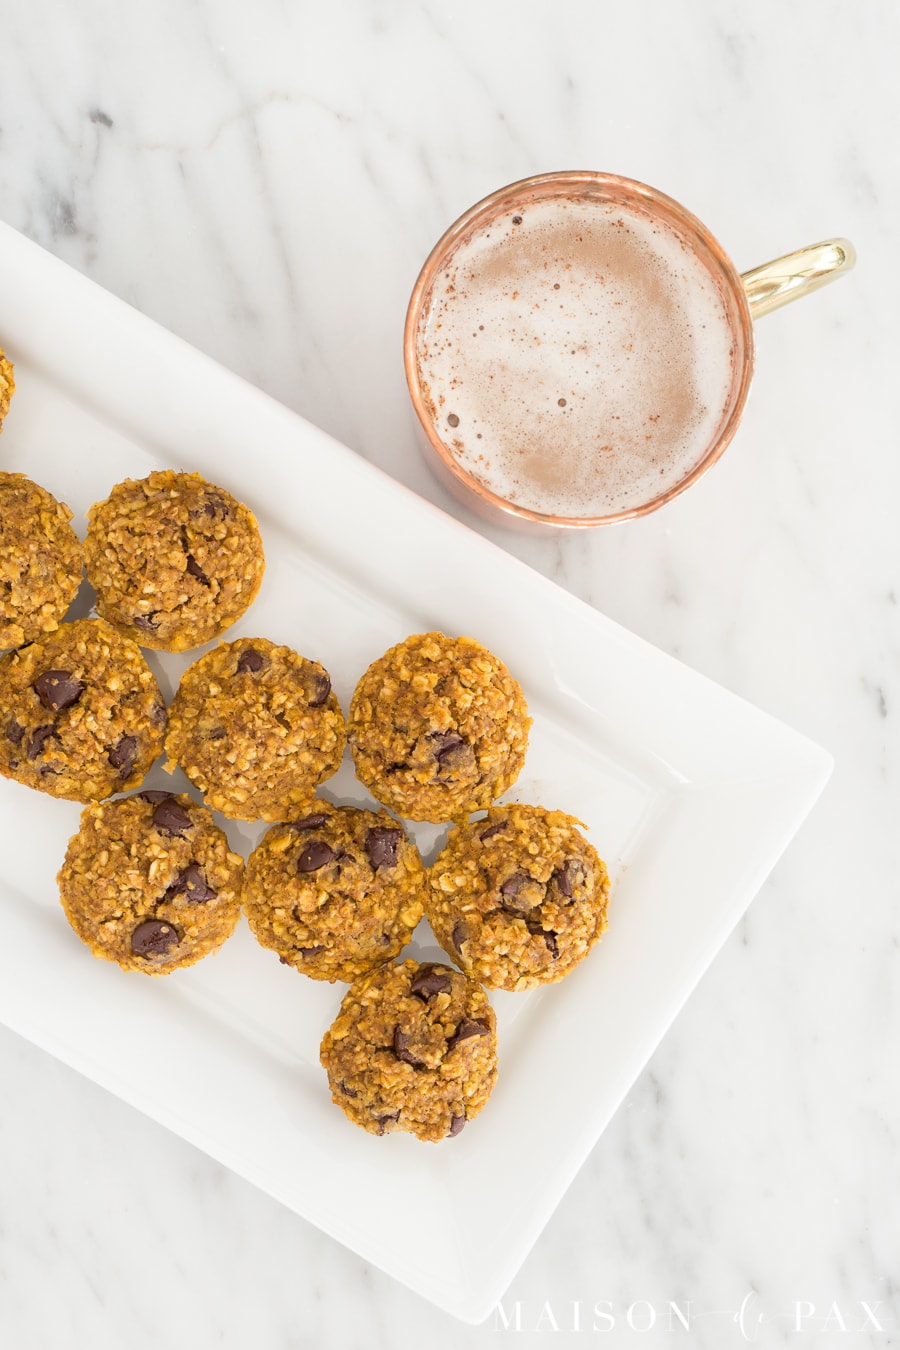 Gluten free pumpkin muffins with chocolate chips: Made with applesauce and a touch of maple syrup for sweetening, oat flour, and pumpkin, these are packed with delicious flavor and nutritious ingredients #gf #glutenfree #pumpkinspice #fallrecipe #pumpkinrecipe #pumpkinmuffins #breakfast #gfbreakfast